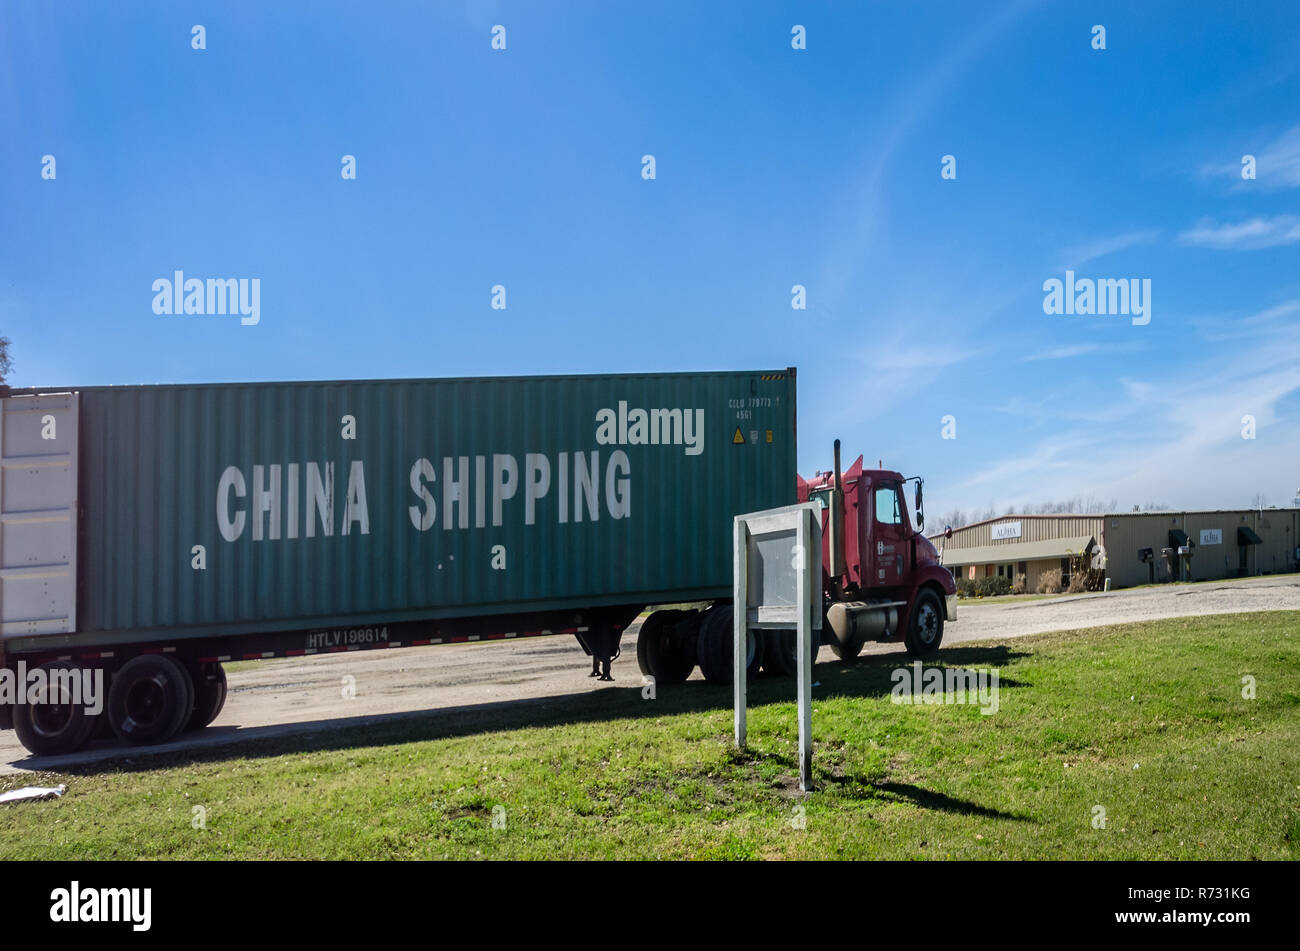 A truck is pictured outside Aloha Hospitality International, March 6, 2016, in Loxley, Alabama. Stock Photo